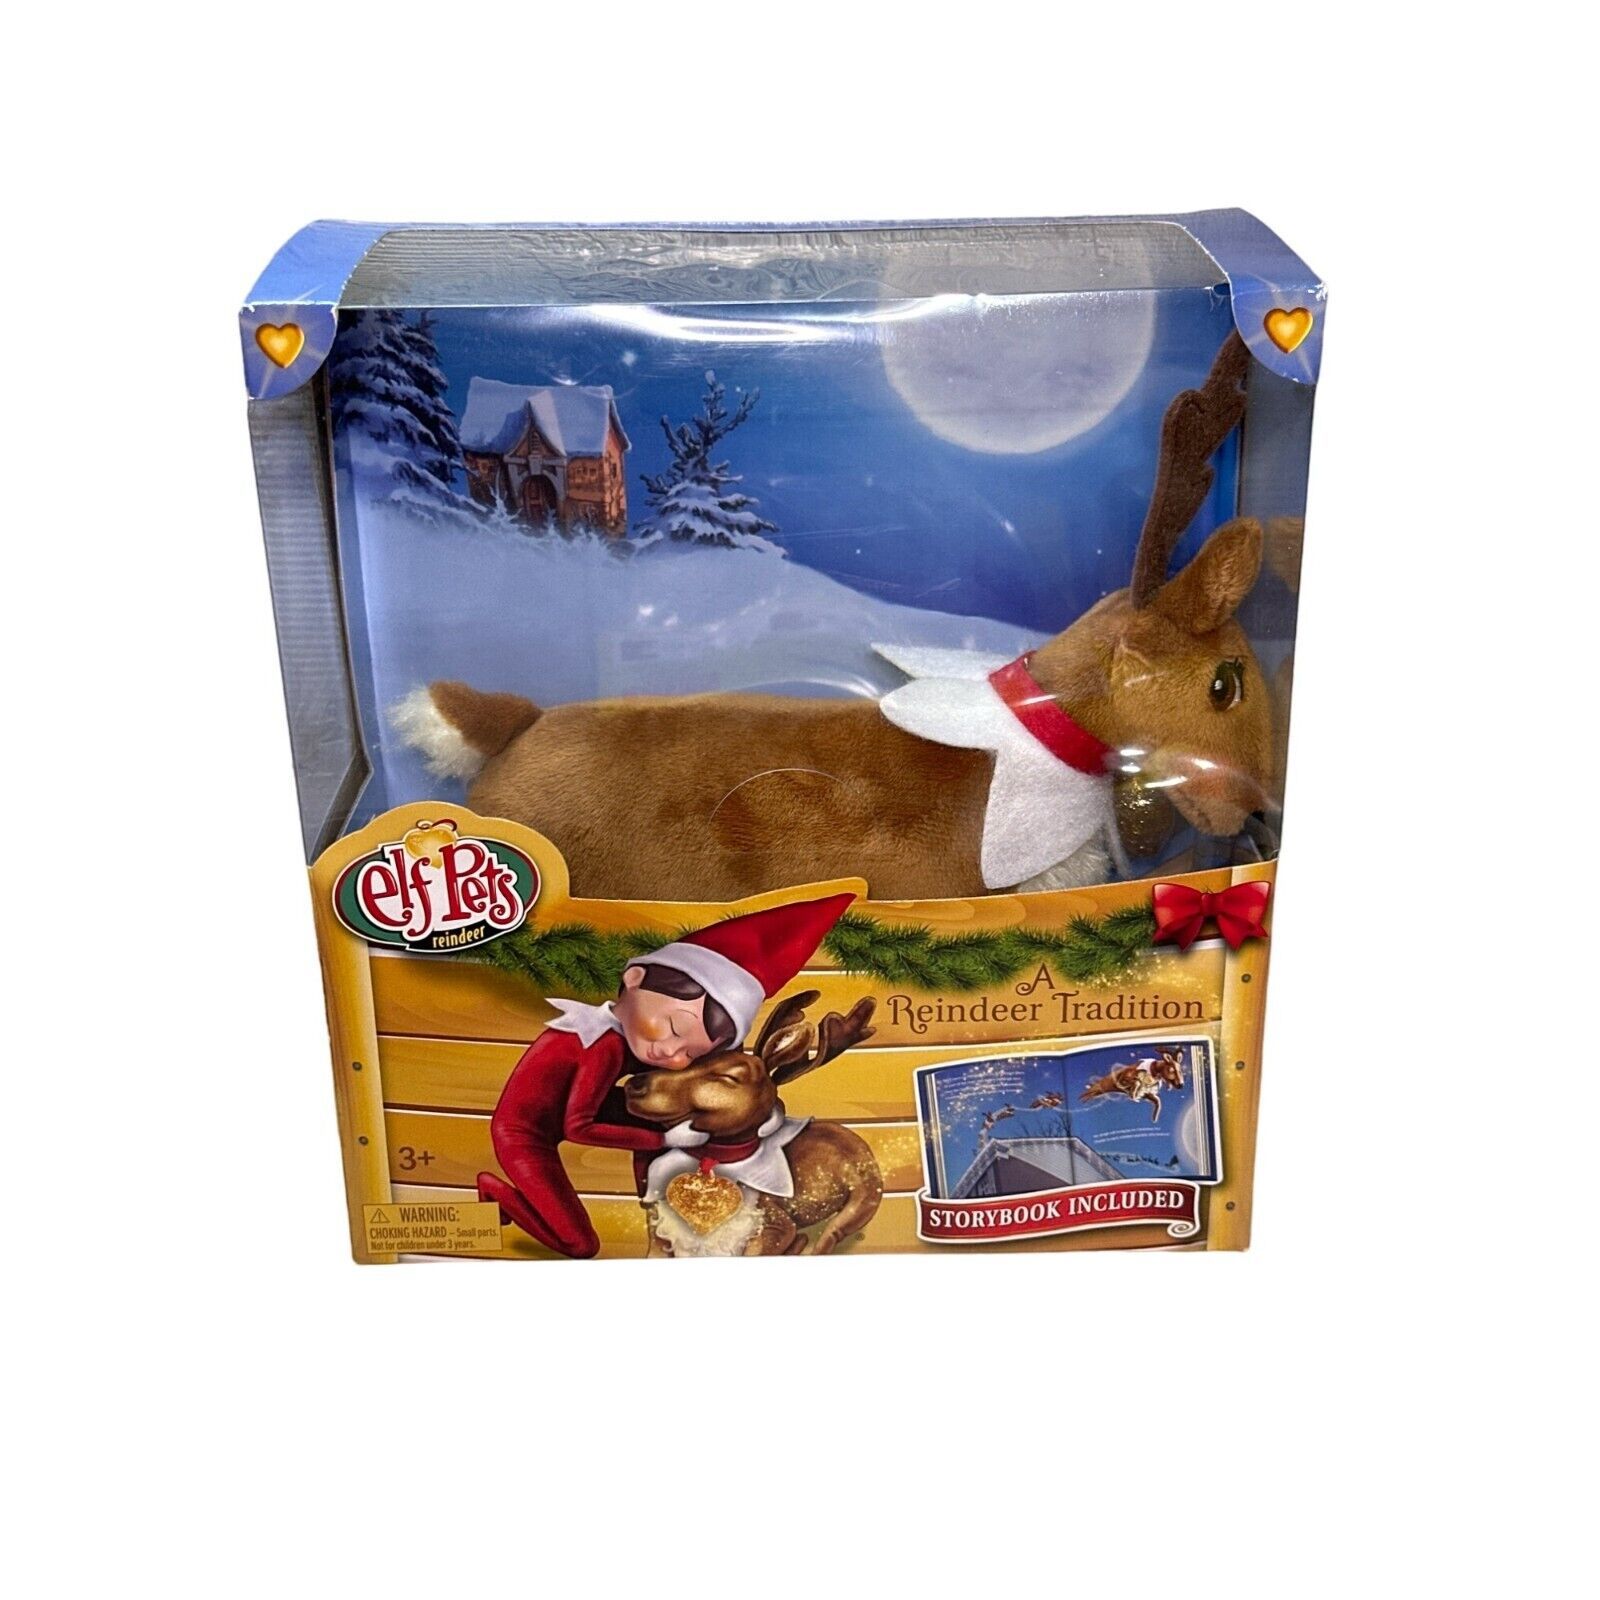 Elf Pets: A Reindeer Tradition Storybook & Plush Elf On The Shelf Pets Book Gift - $36.27